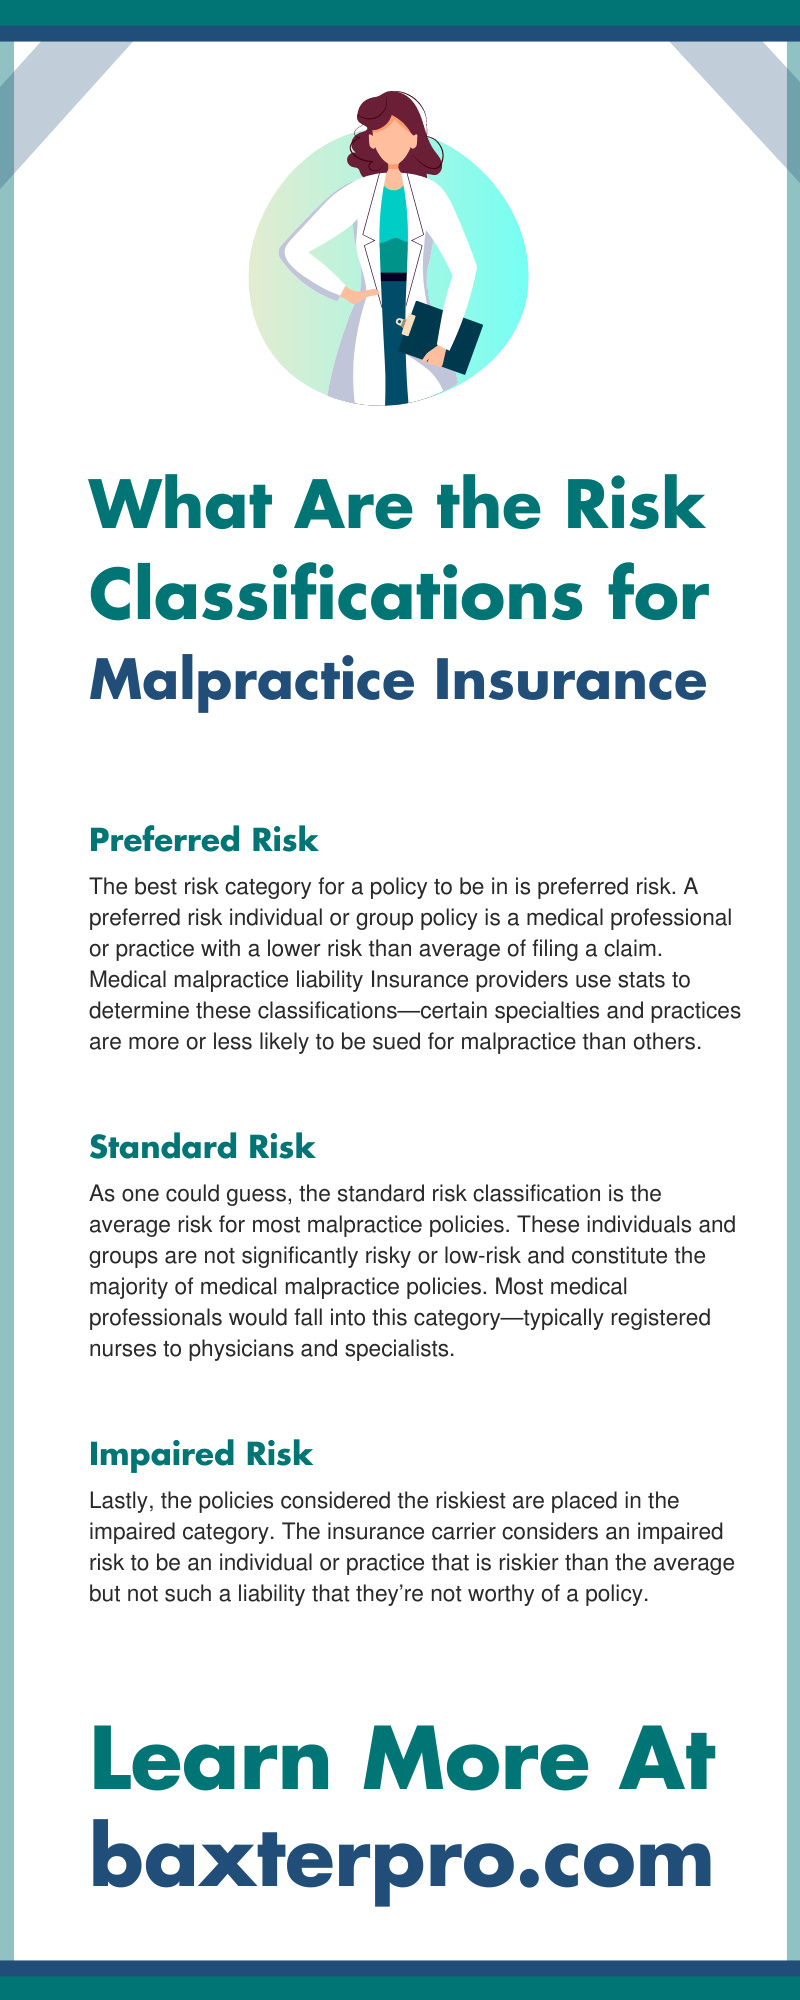 What Are The Risk Classifications for Malpractice Insurance